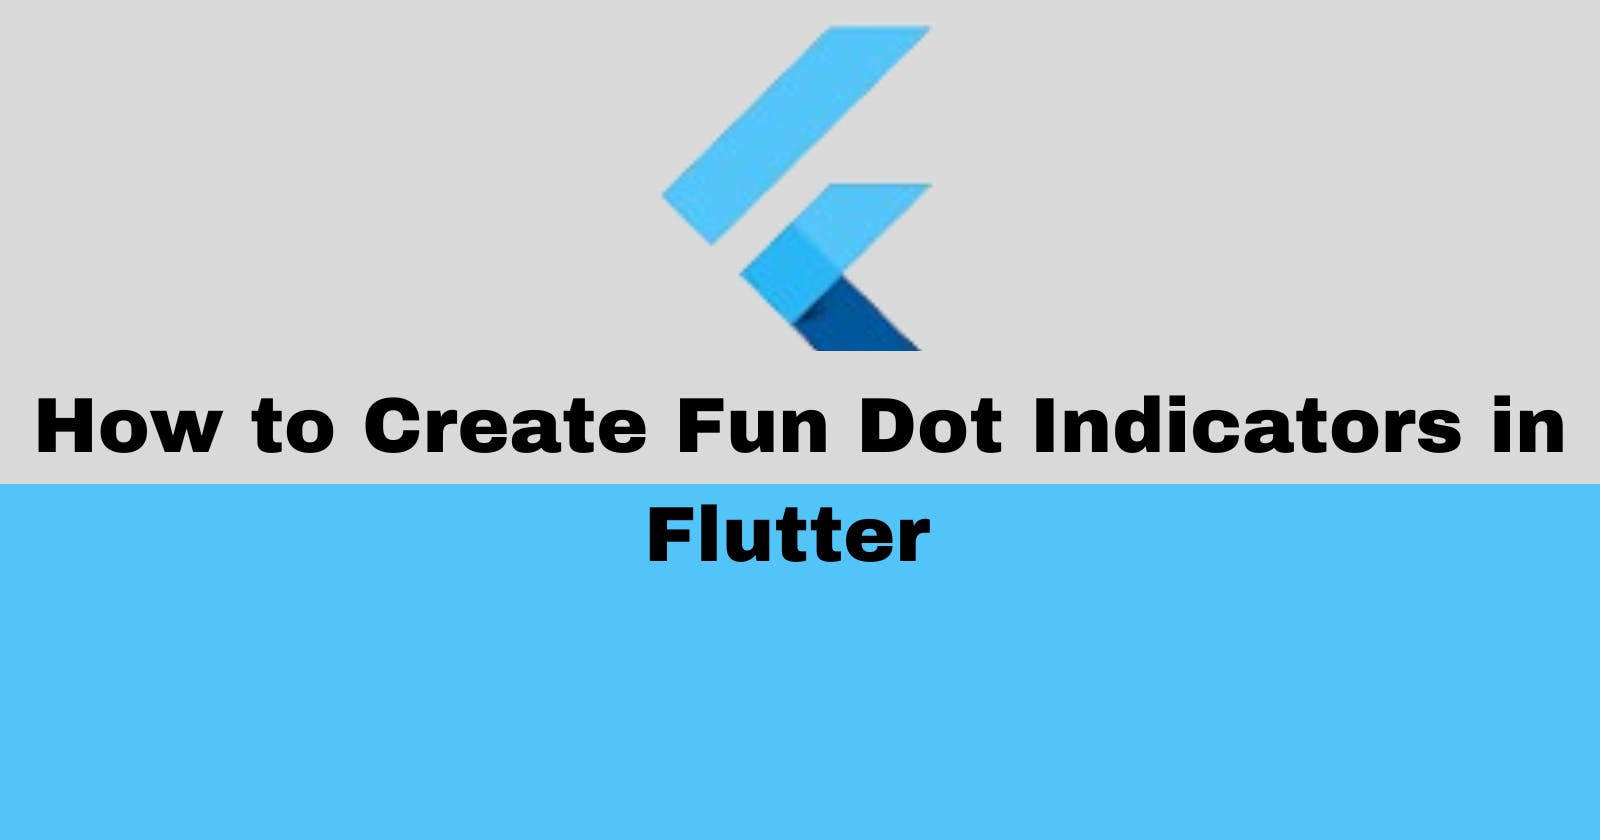 How to Create Fun Dot Indicators in Flutter with the Smooth_Page_Indicator Package